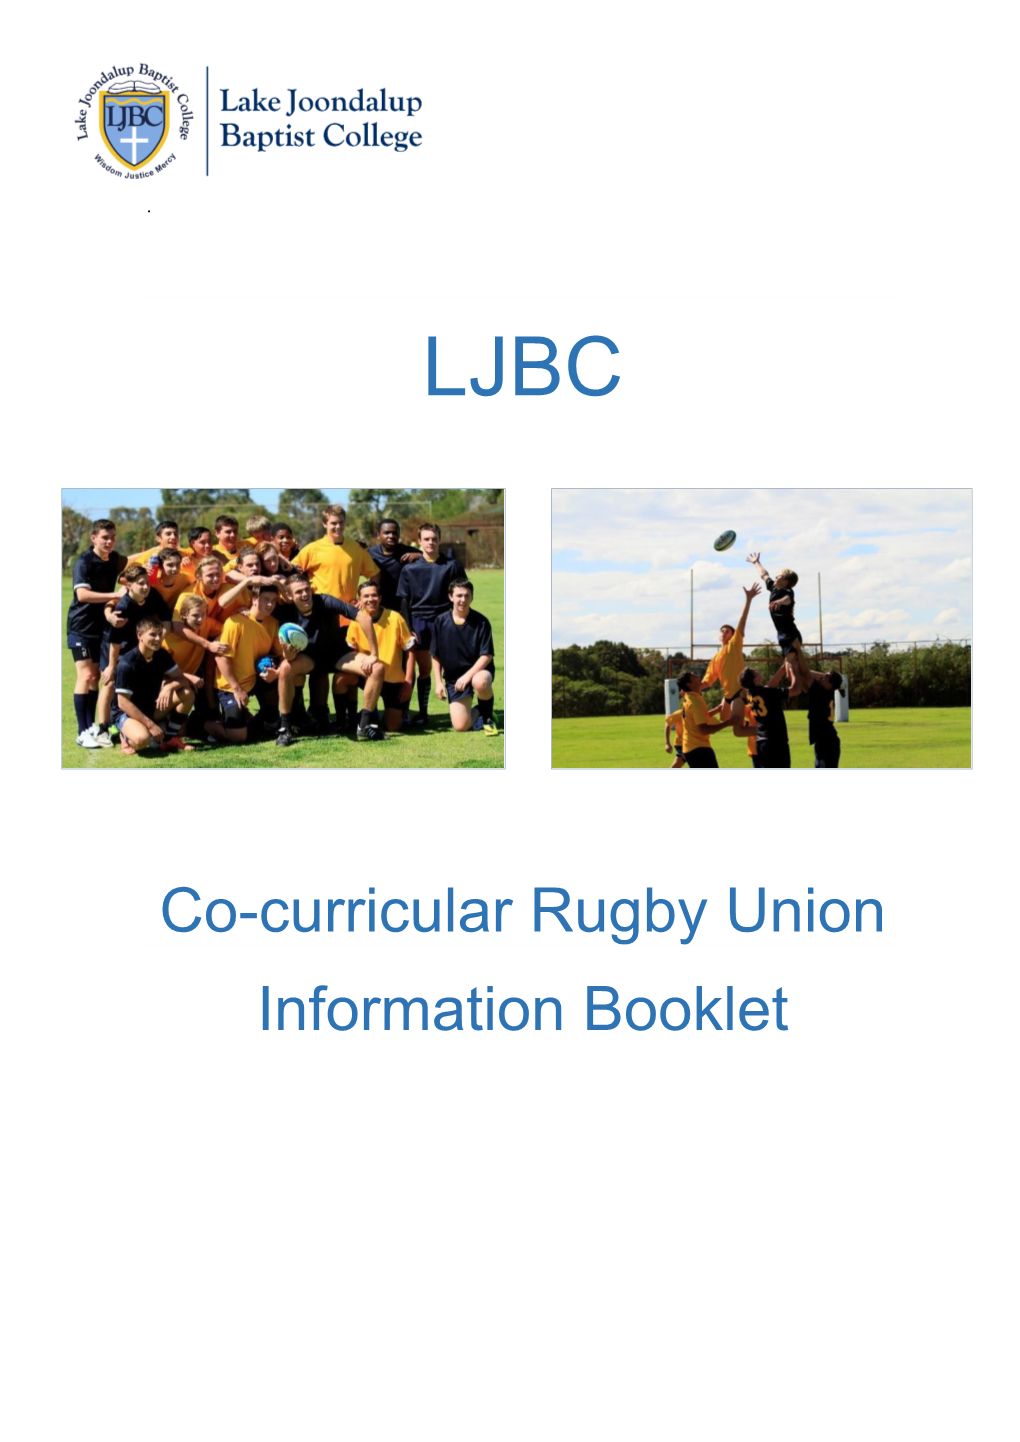 Co-Curricular Rugby Union Information Booklet